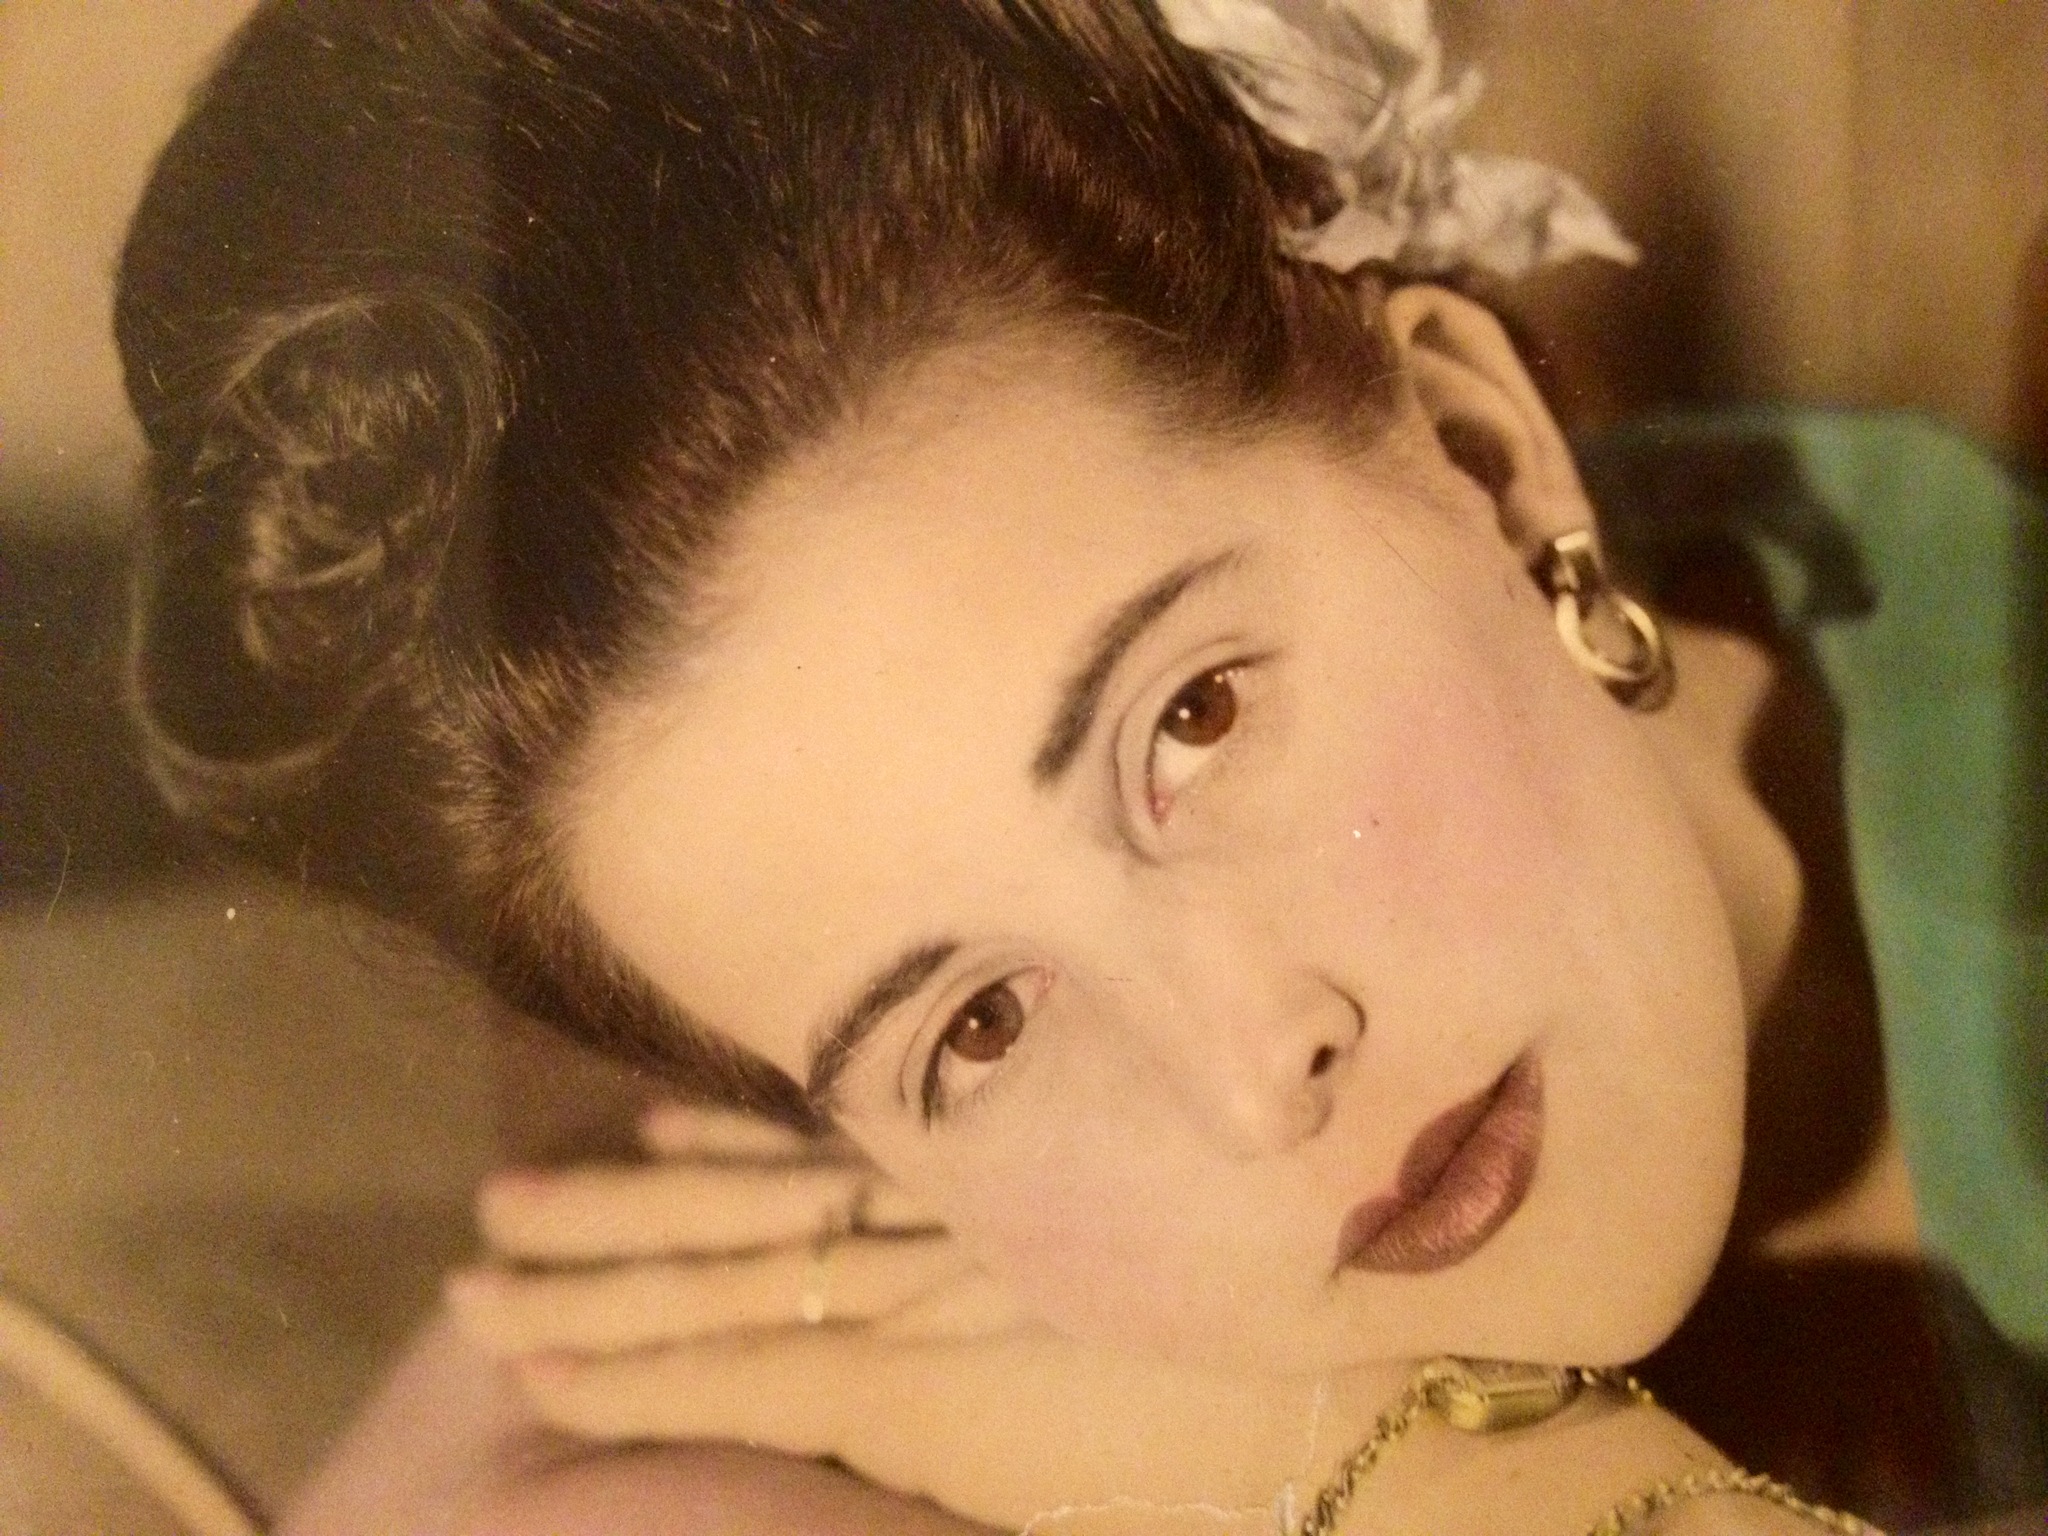 Mom in her twenties.......a beauty then and a beauty forever!